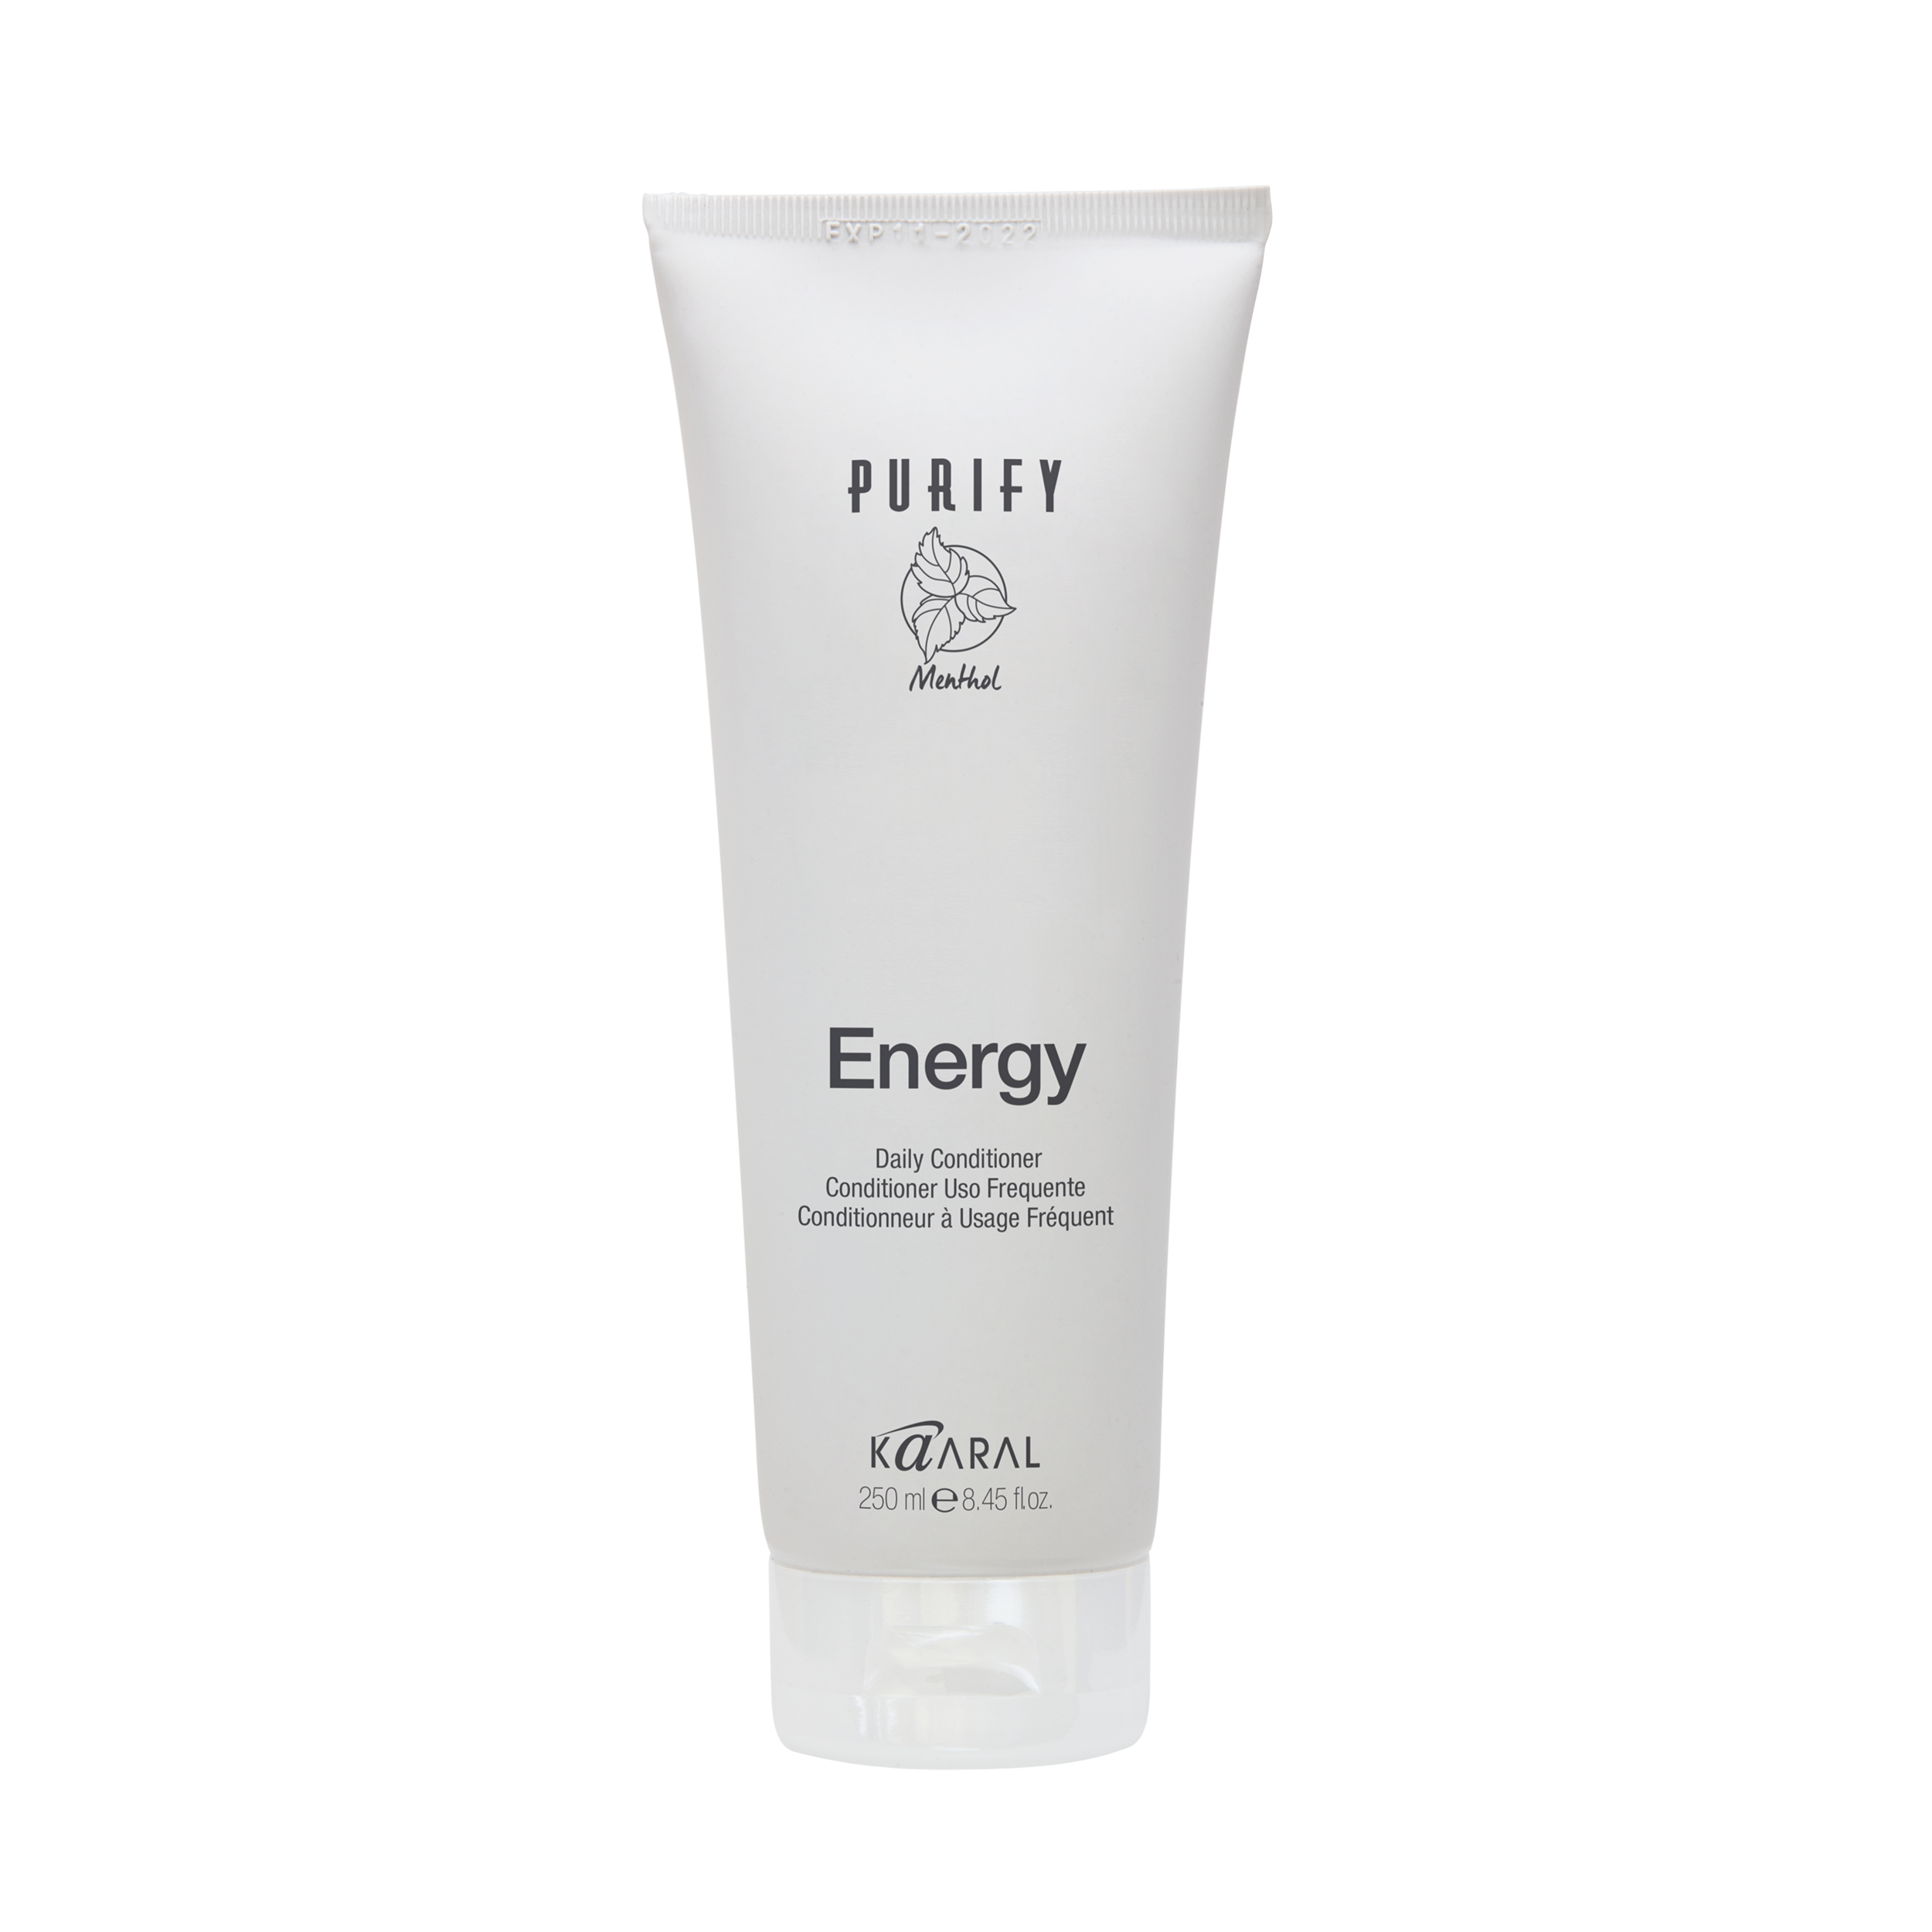 Kaaral - Purify Energy Conditioner Retail Size - Creata Beauty - Professional Beauty Products